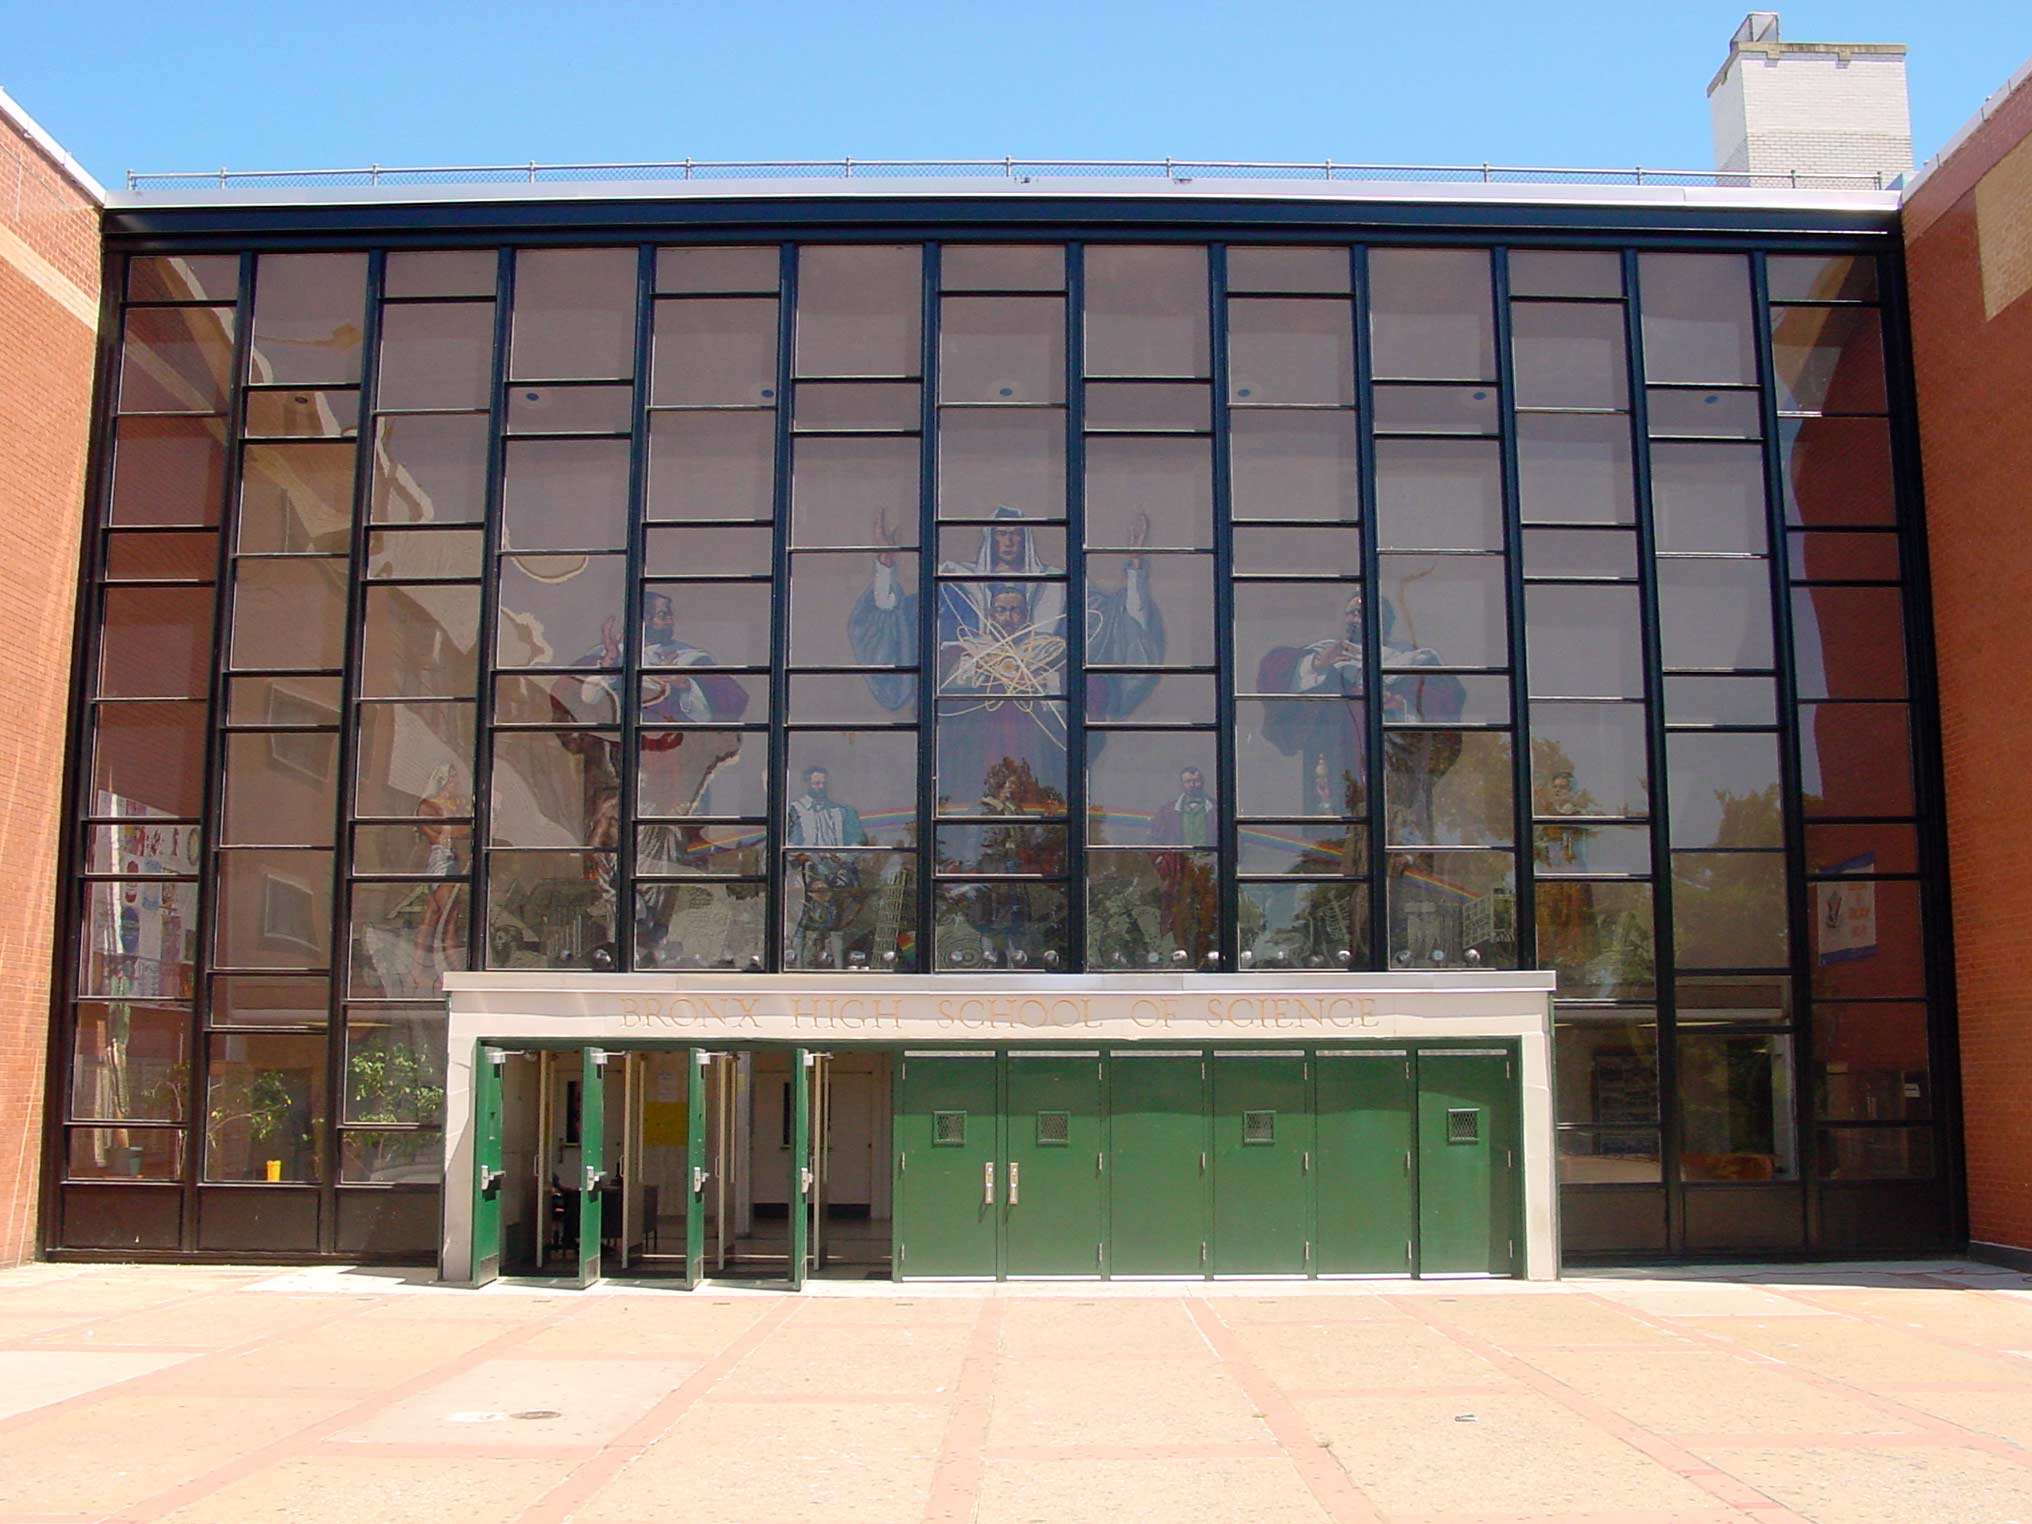 The entry to the high school. Beyond the doors and glass facade is the lobby and the giant mosaic.